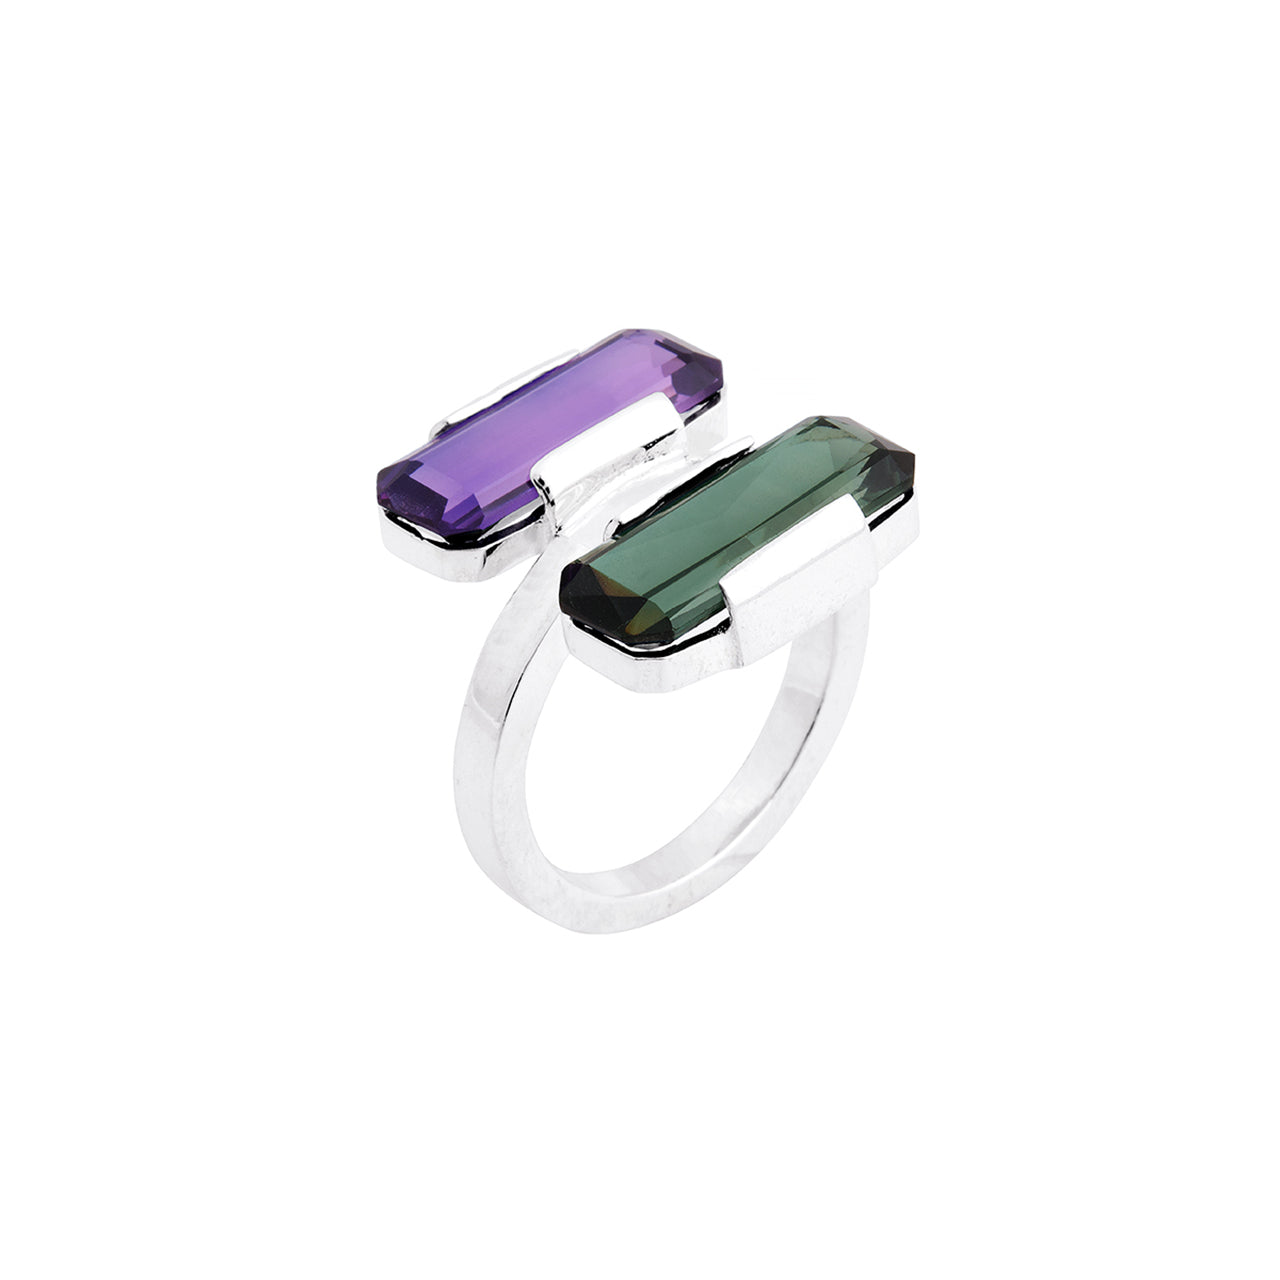 silver apex ring with vintage purple and green stones